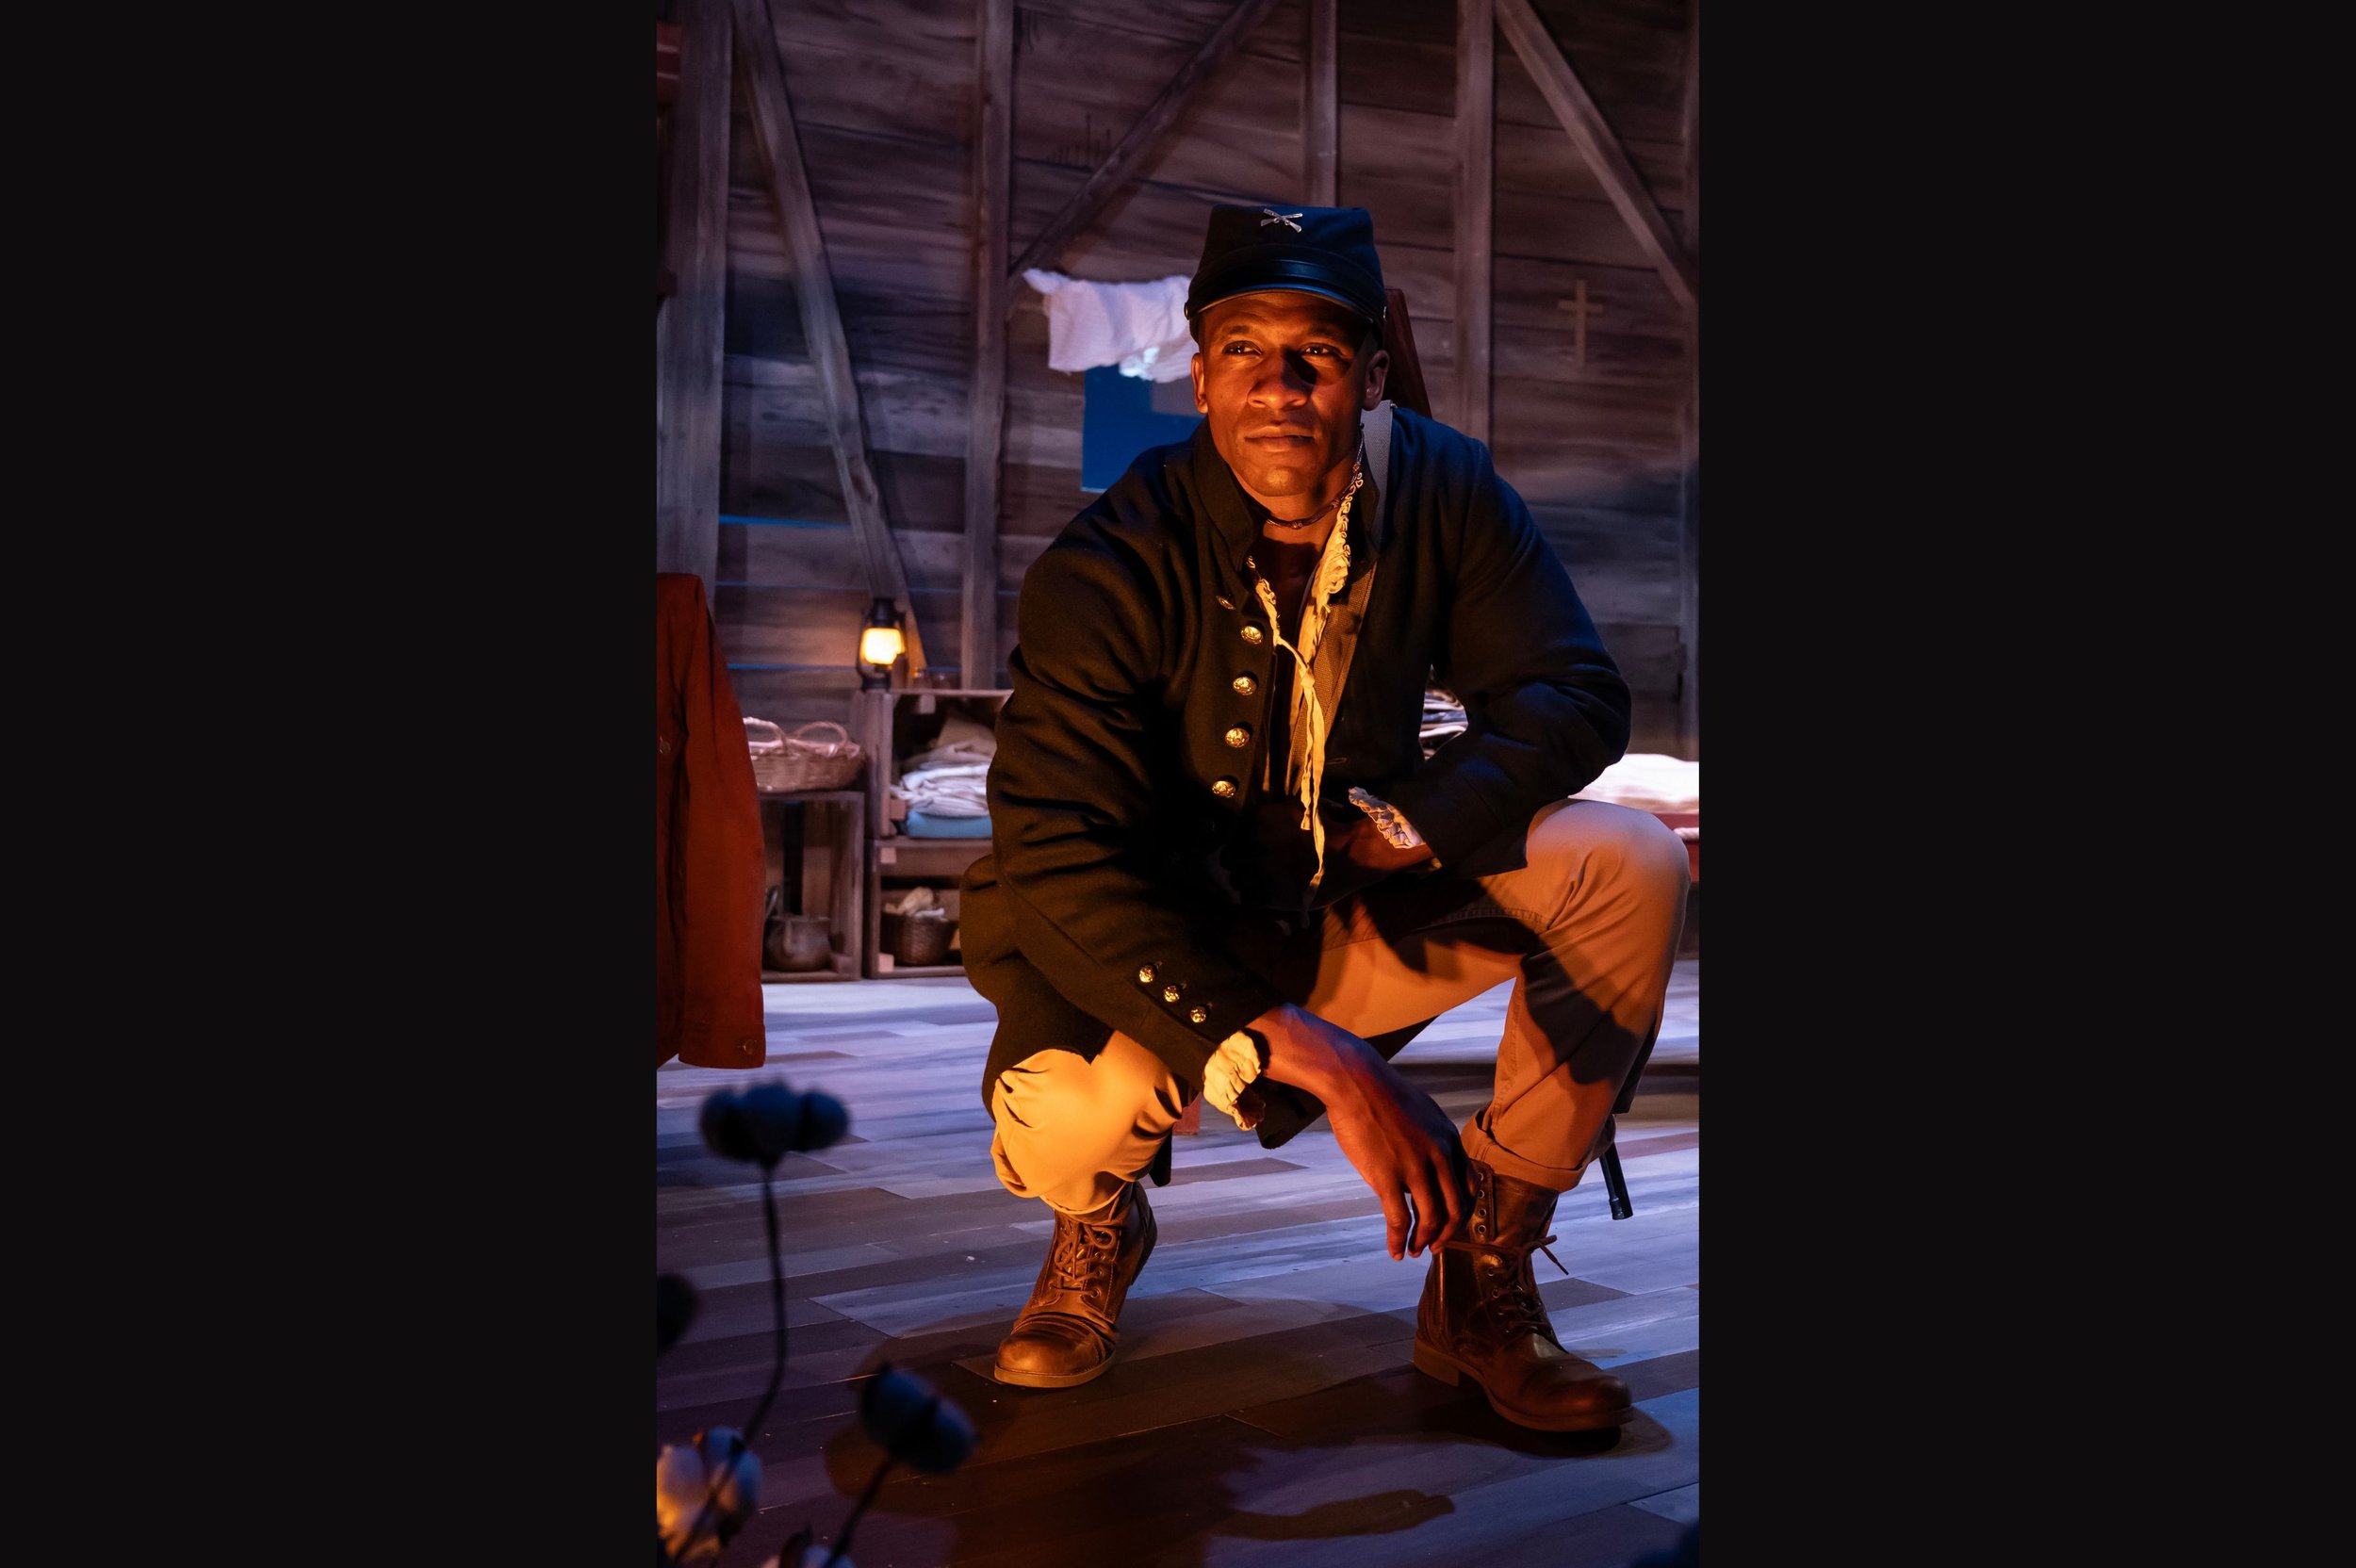   Joel Ashur as Abner in Mosaic Theater’s production of  Confederates  by Dominique Morisseau. Photo by Chris Banks.  